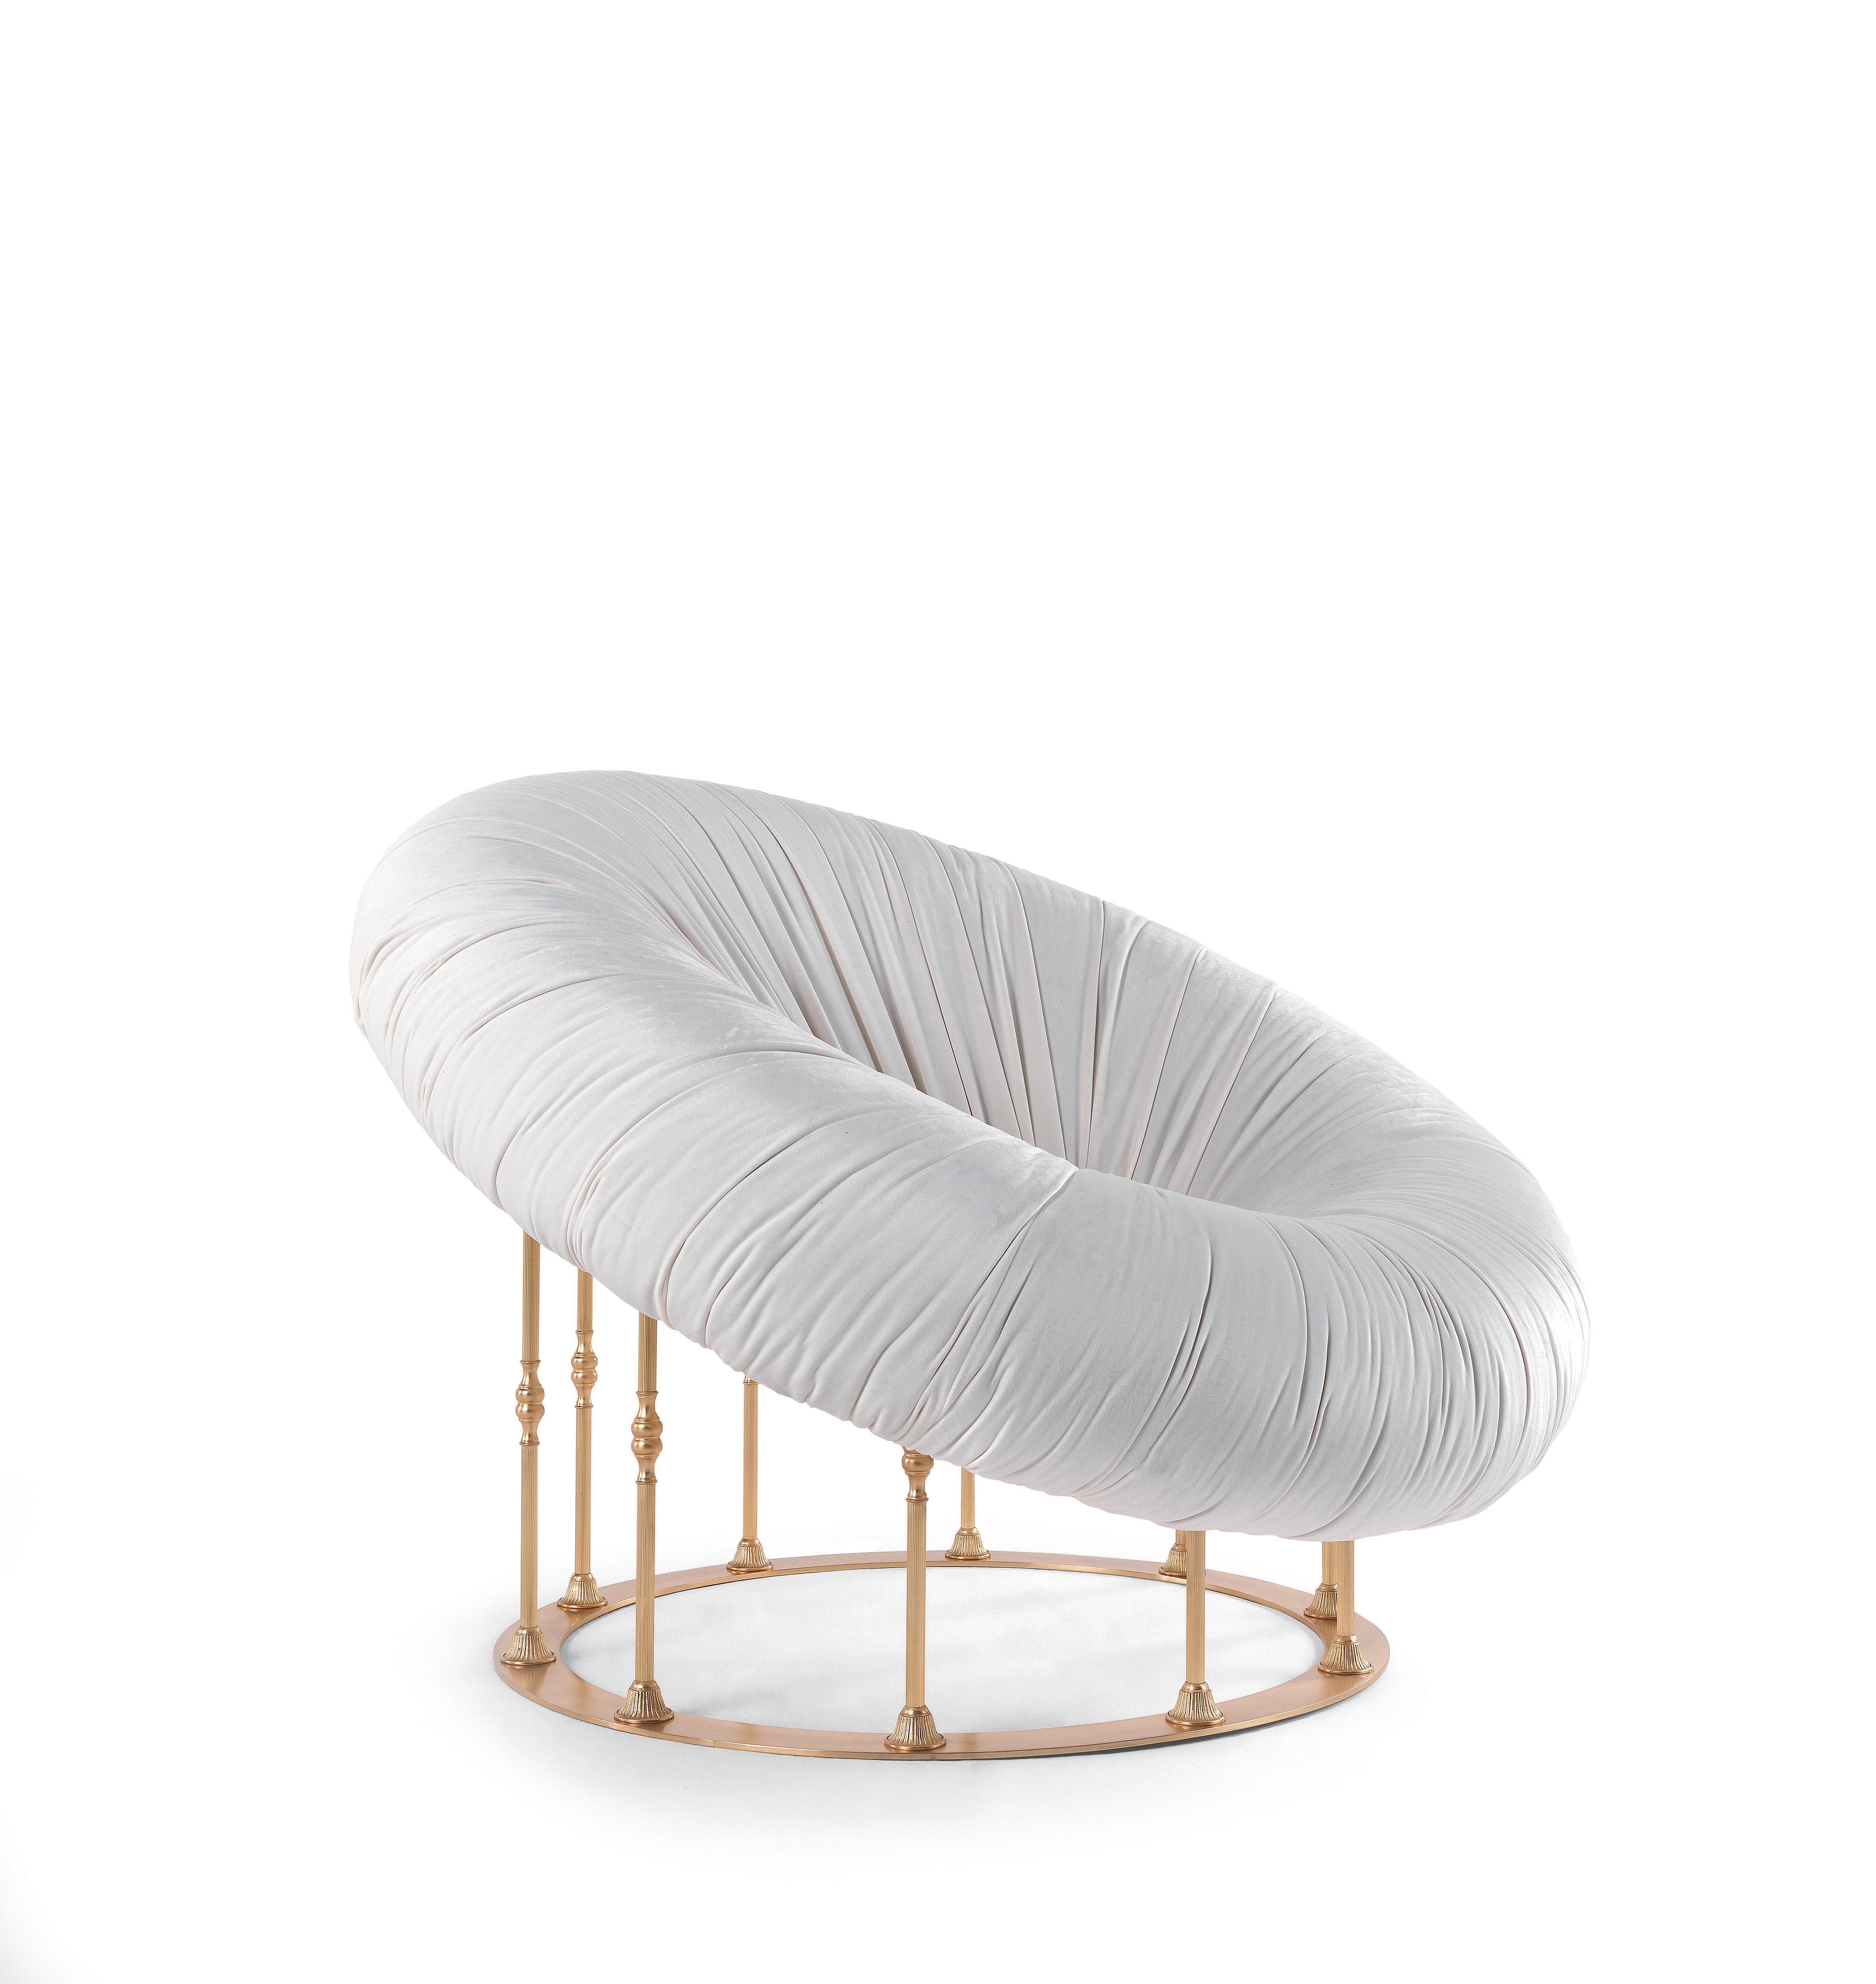 Italian 21st Century Hawking Armchair in Fabric and Base in Lost-wax Cast Brass For Sale